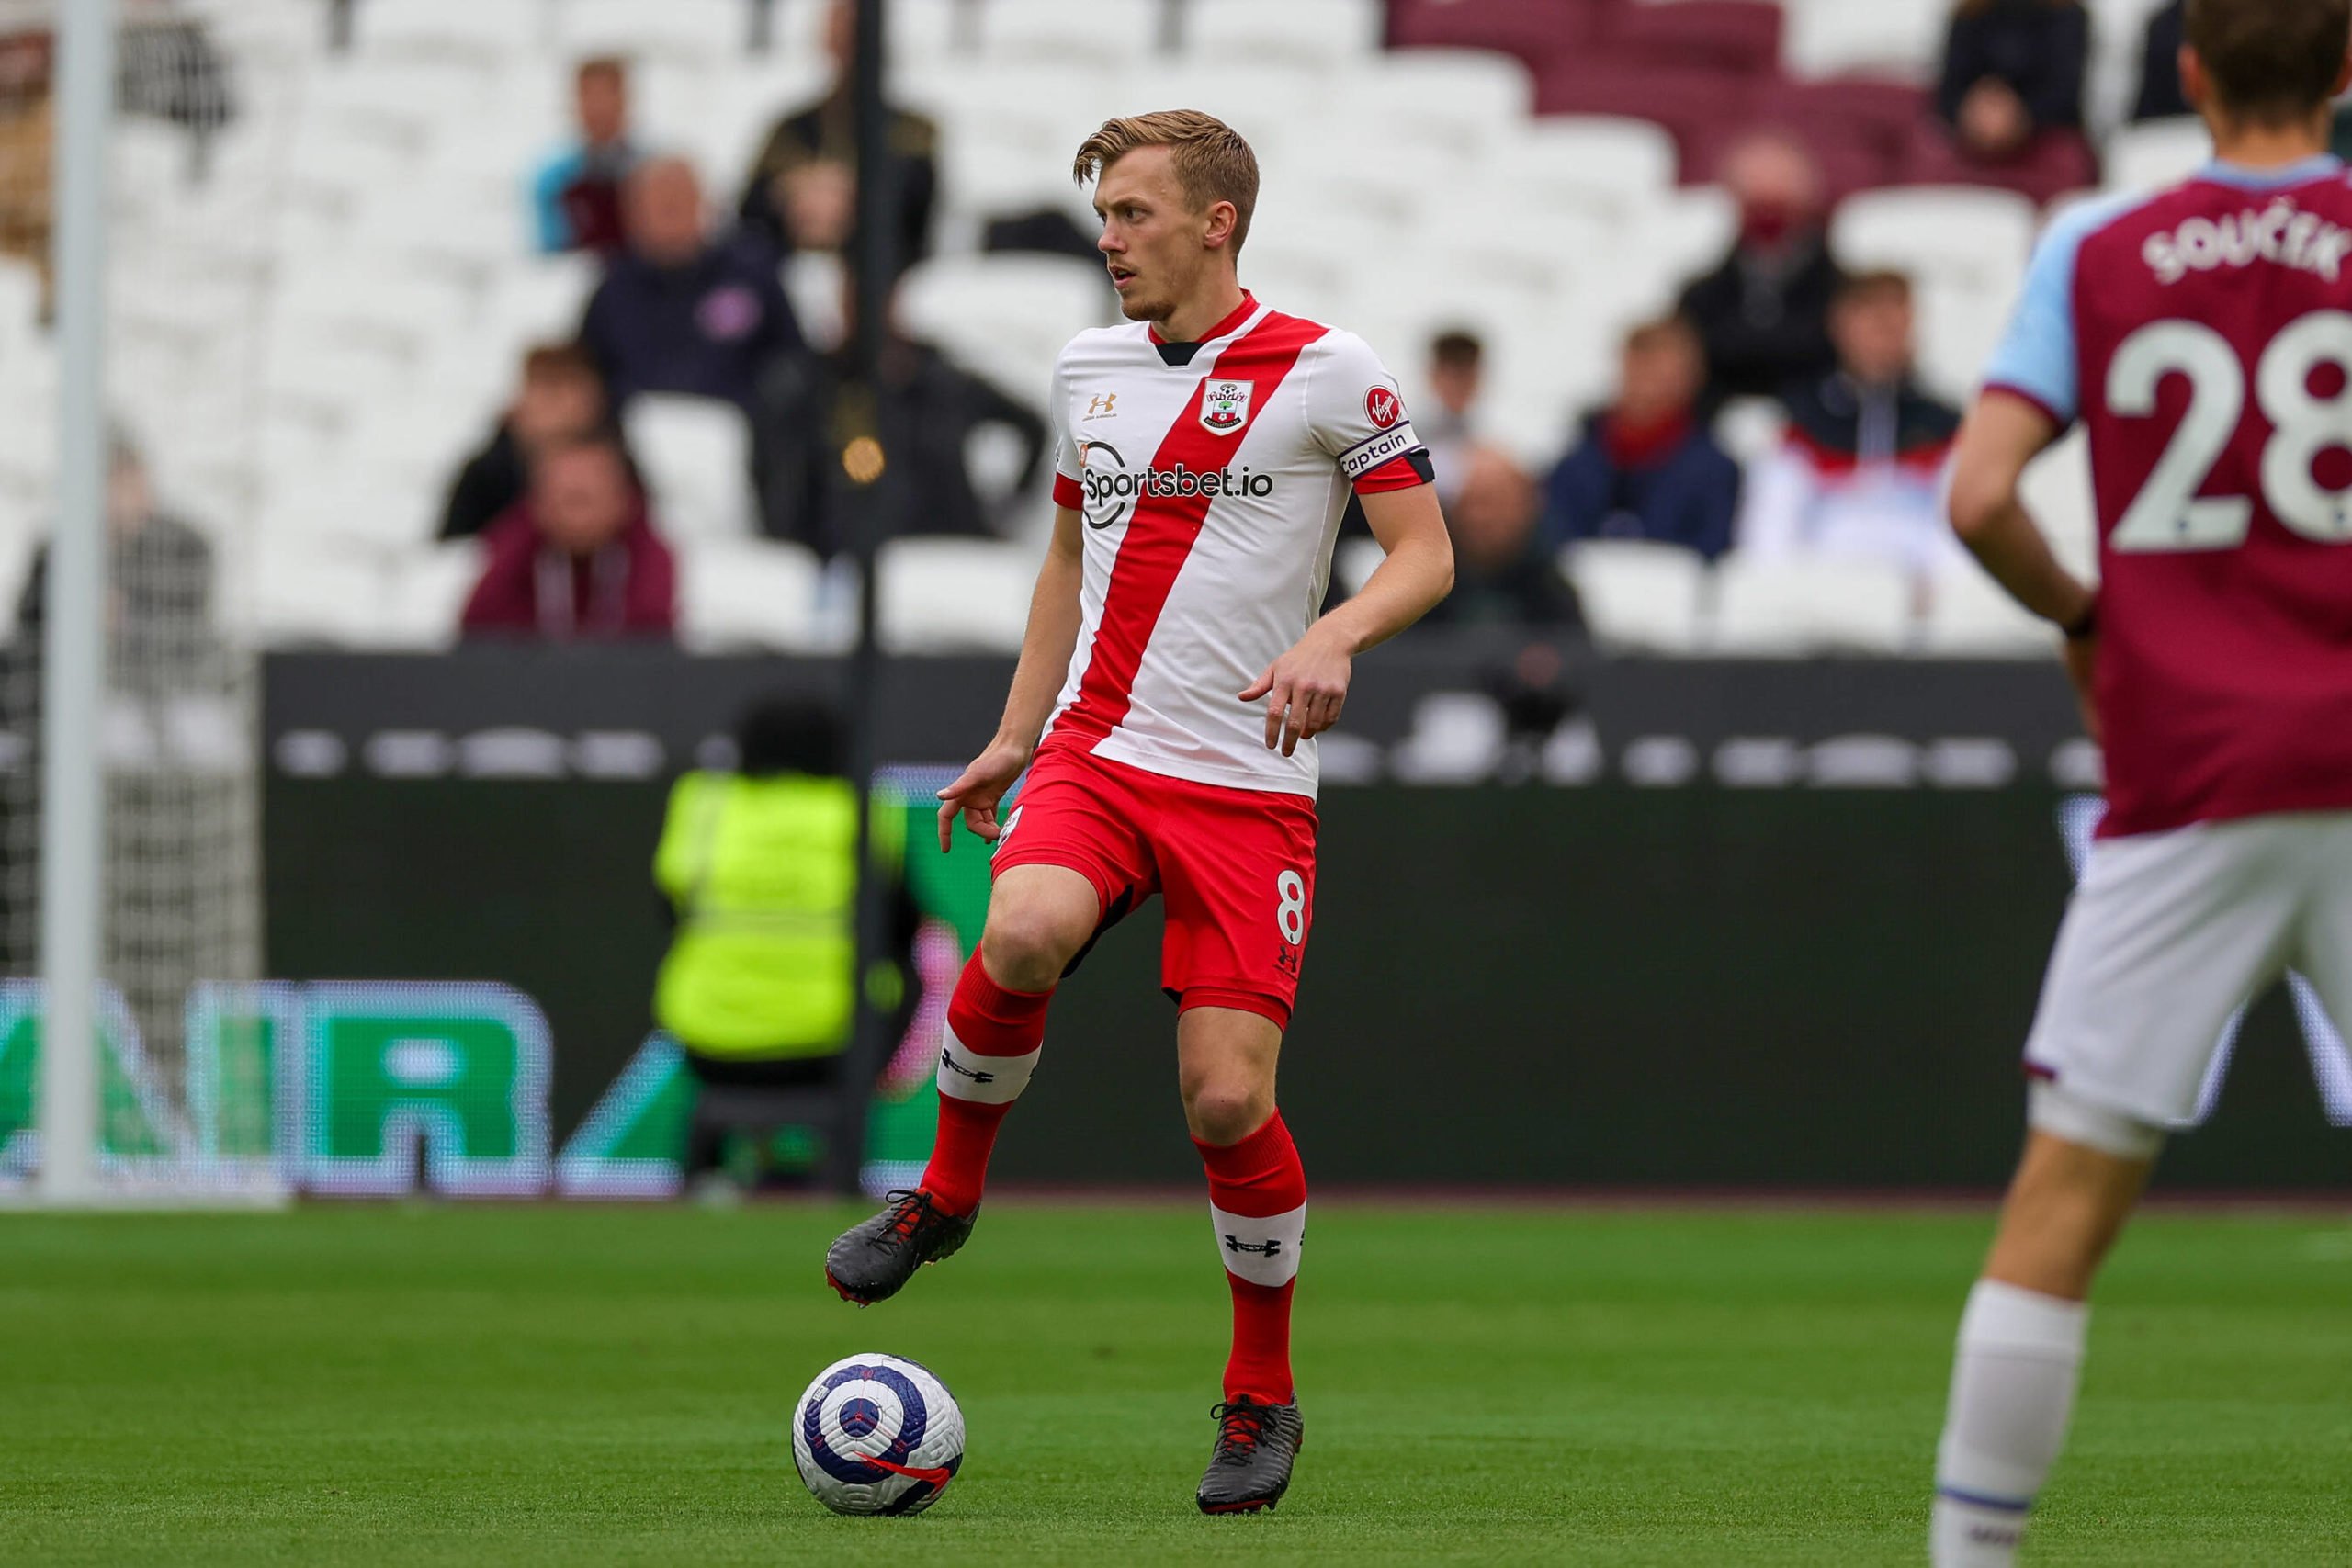 Aston Villa remain the favorites to recruit Ward-Prowse who is seen in the picture